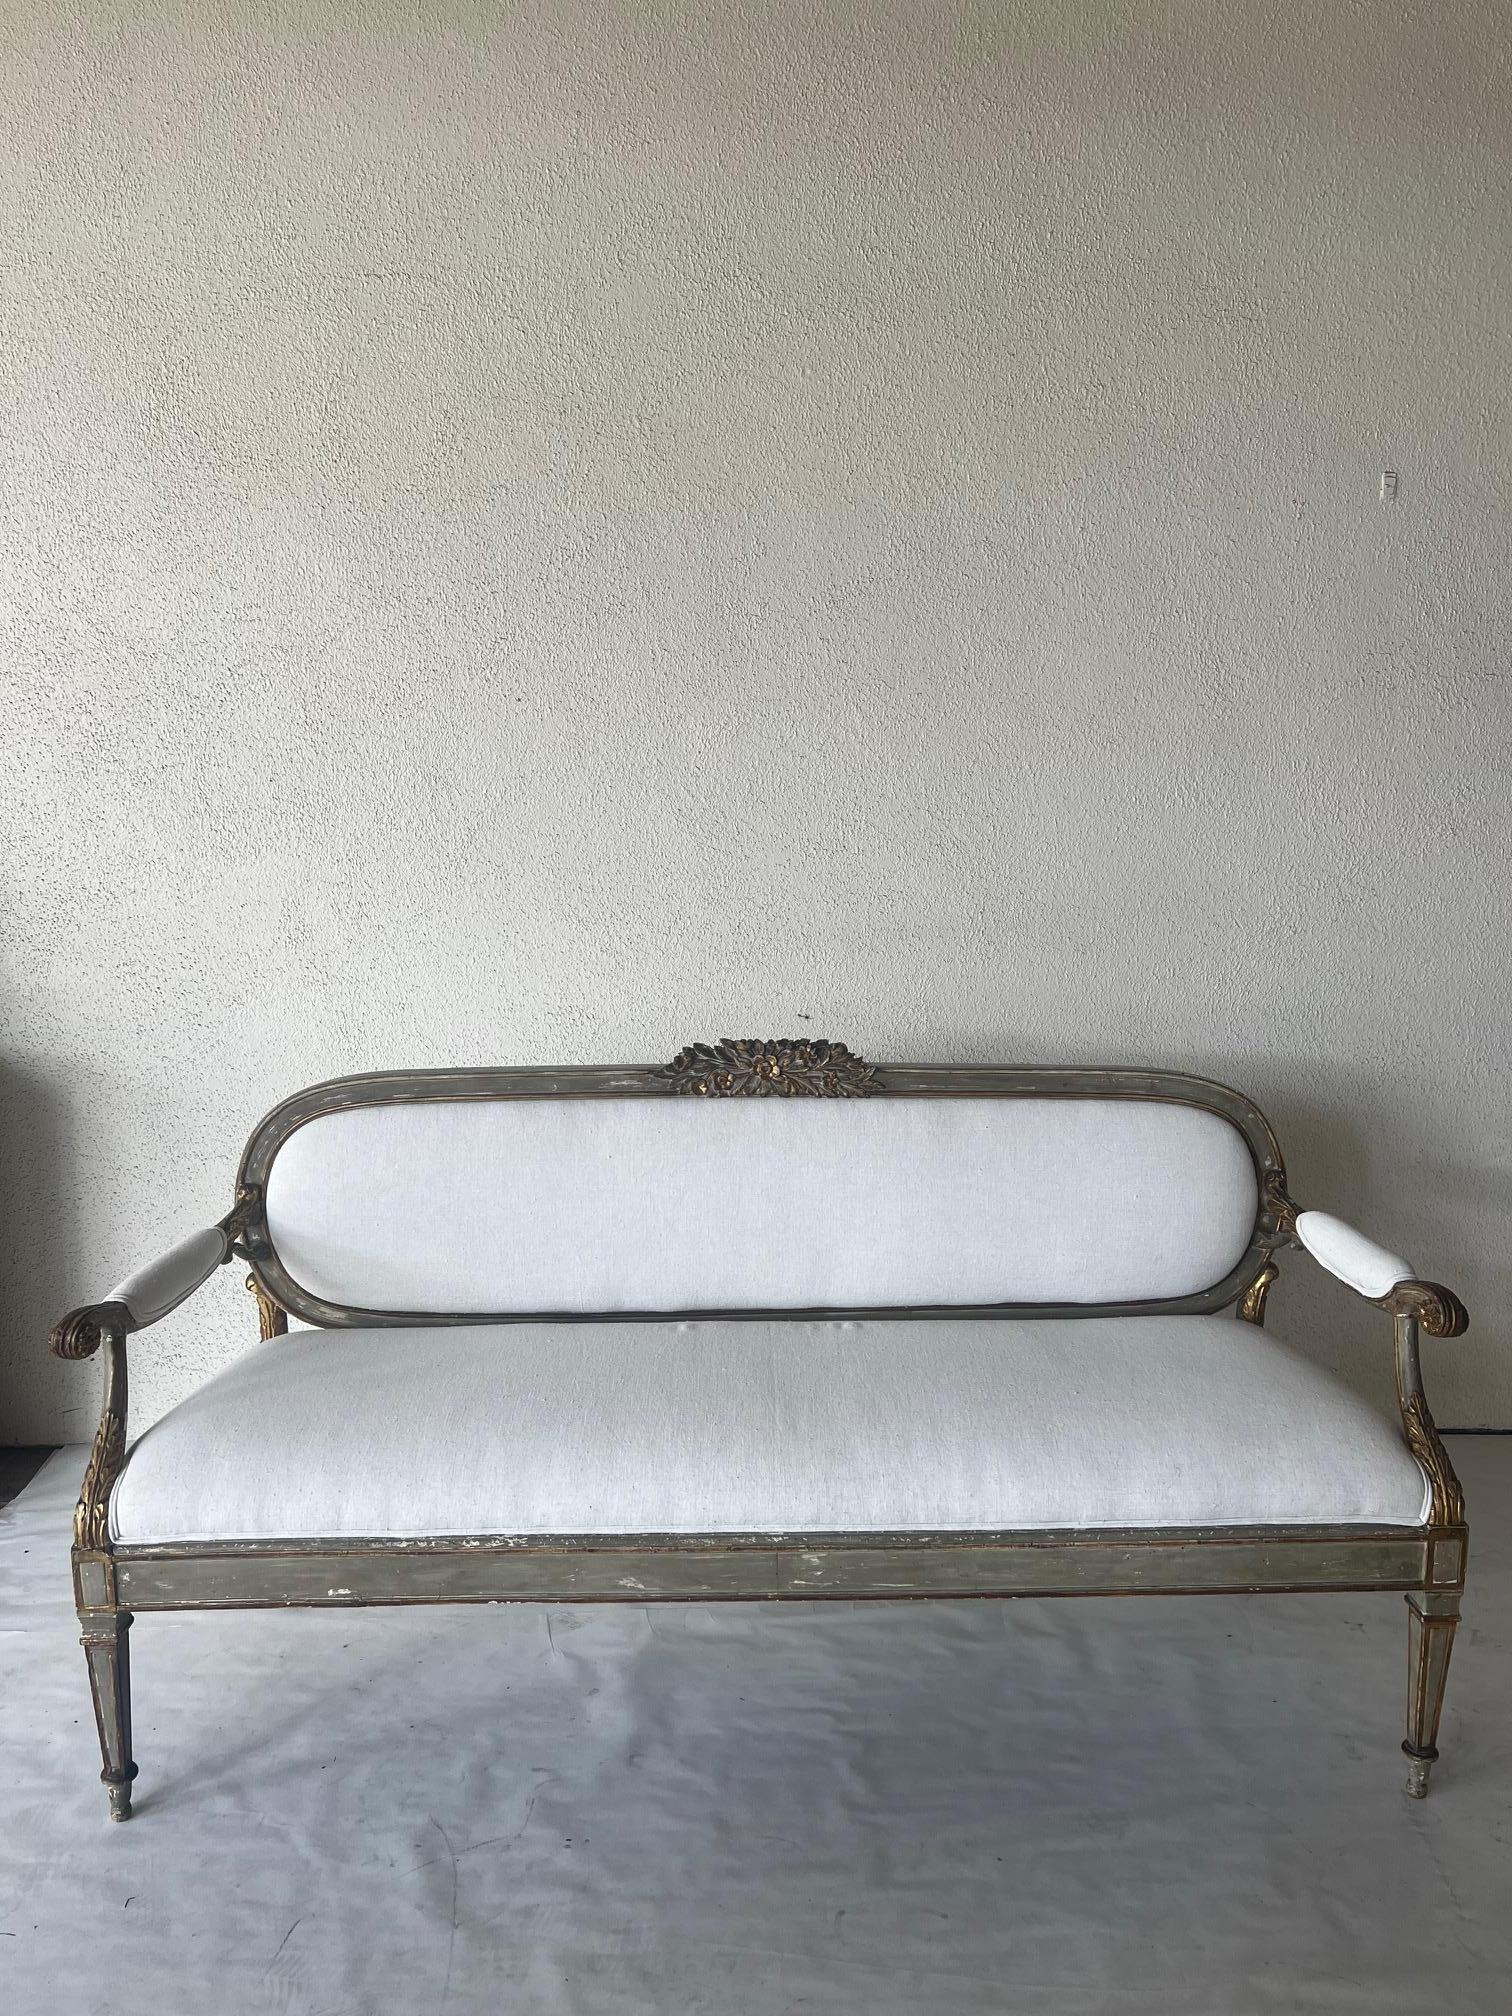 French Provincial 18th Century Settee